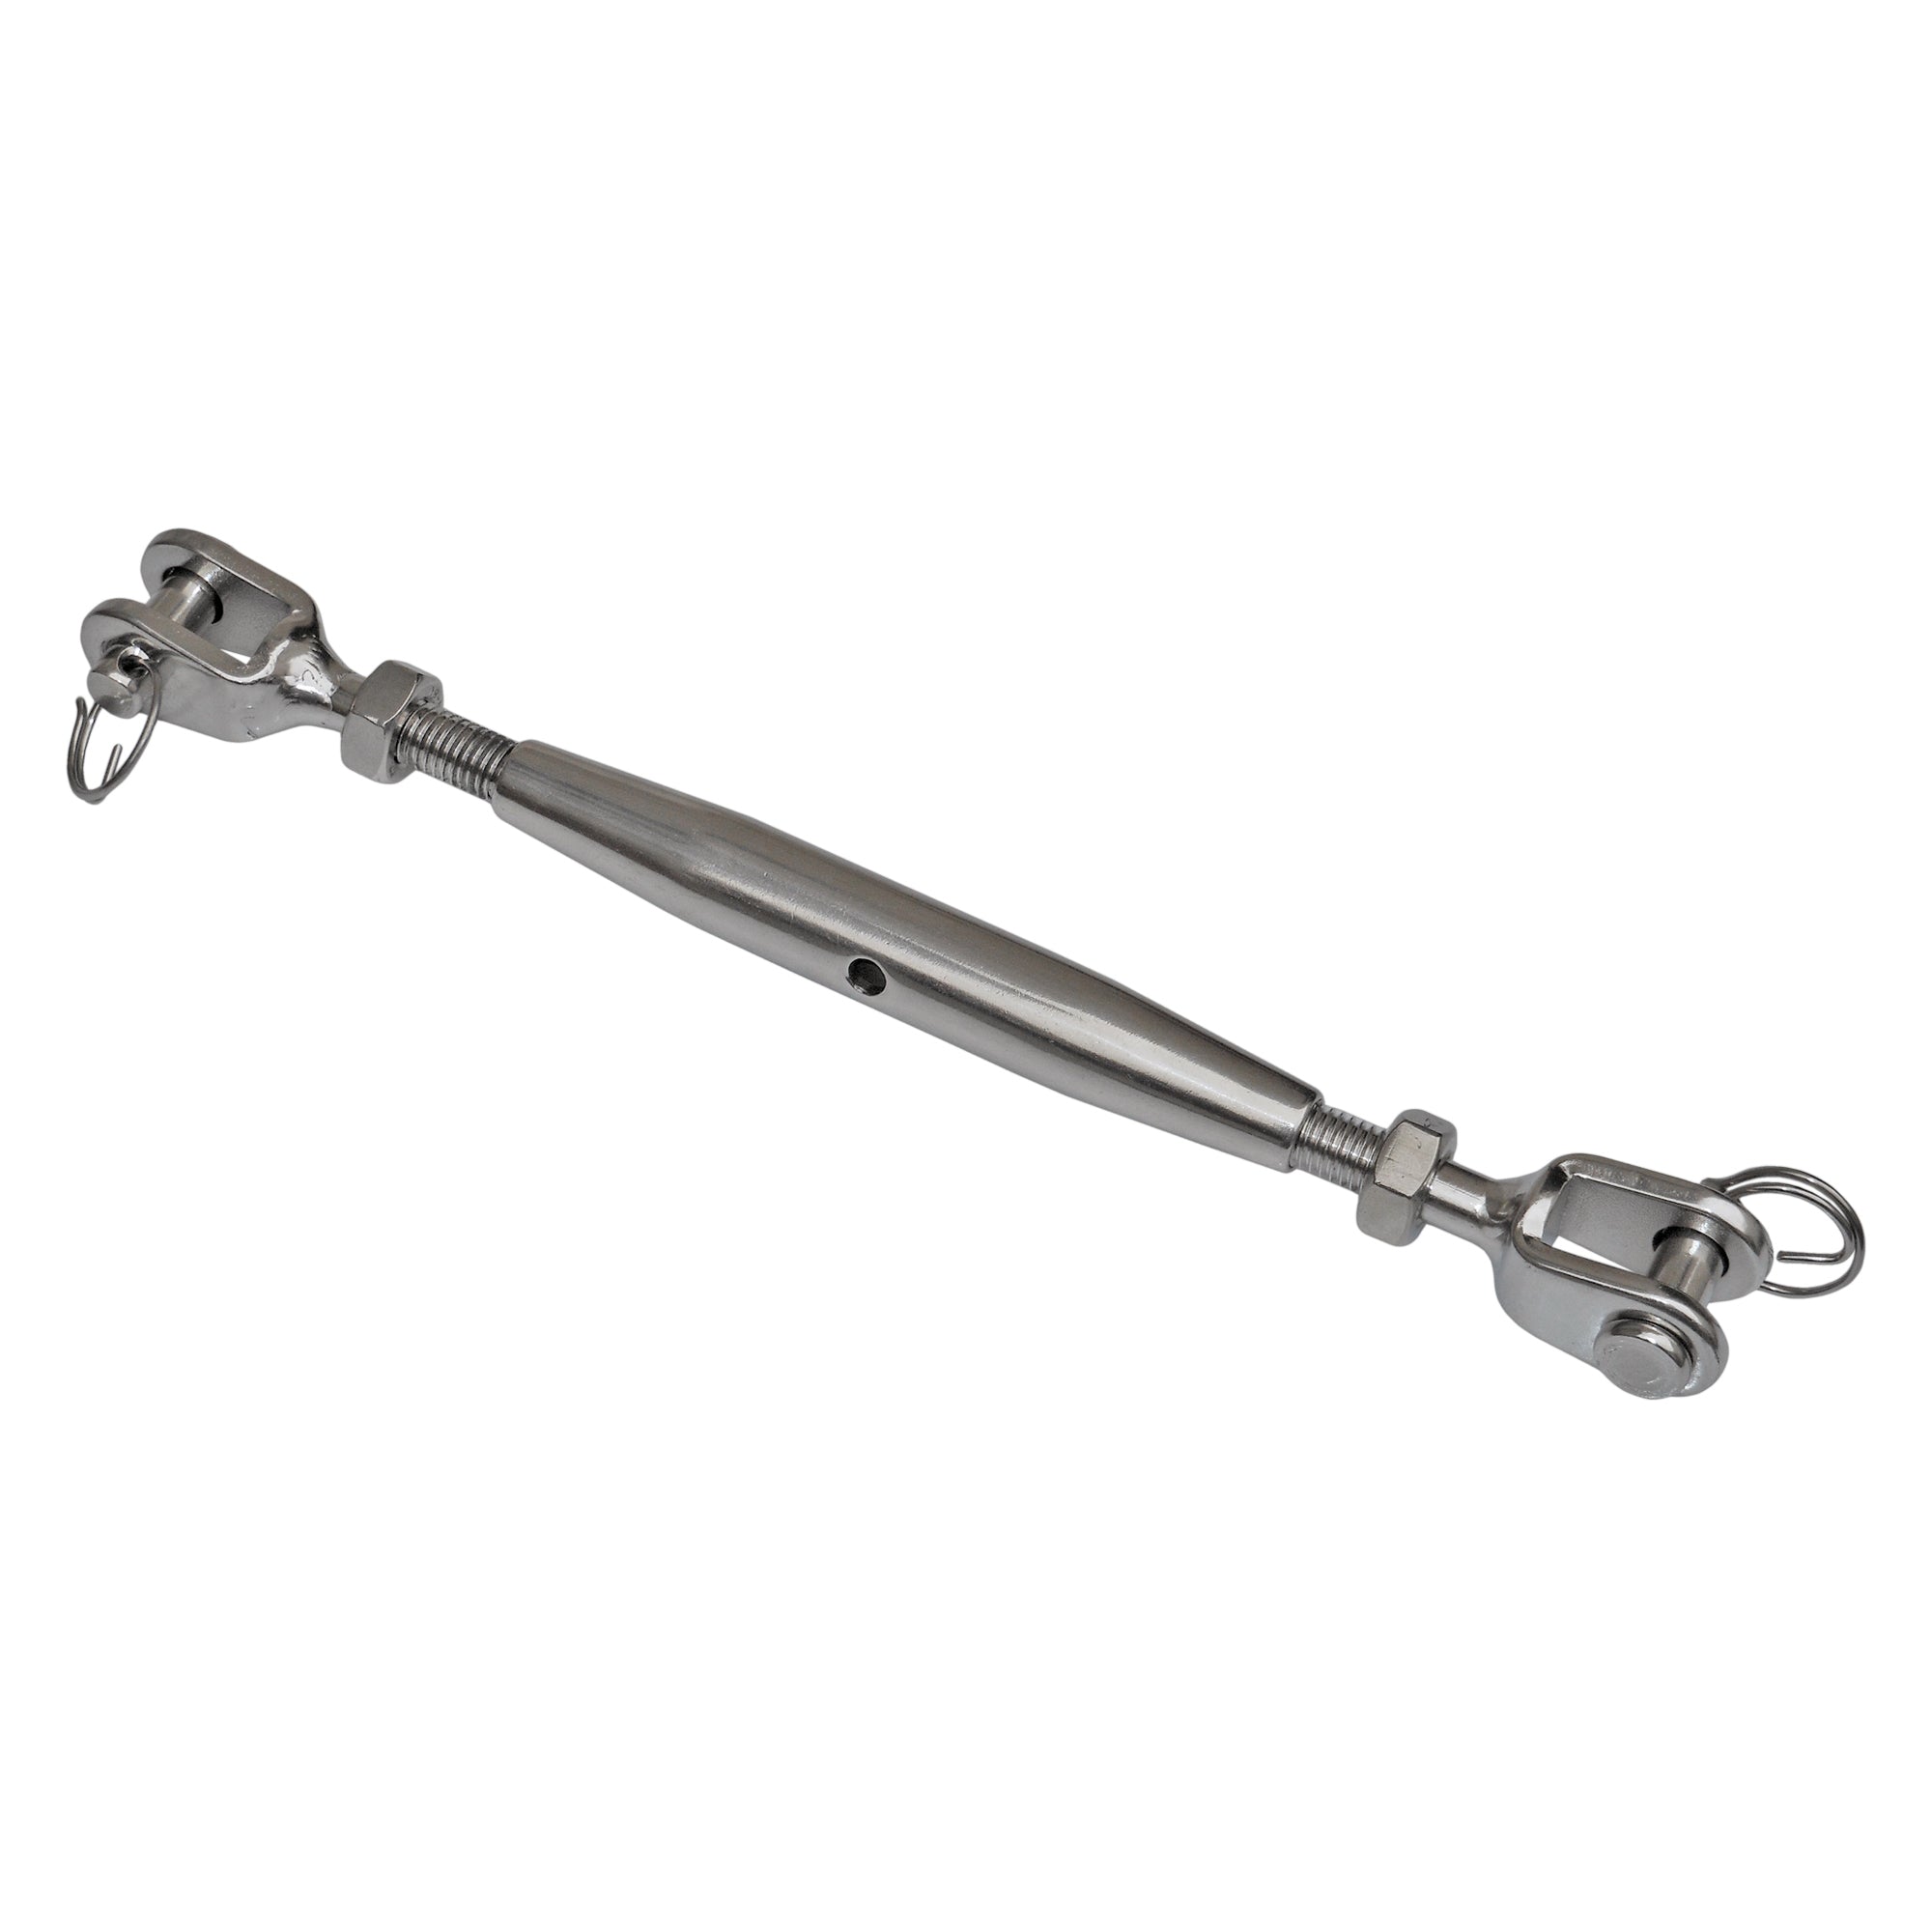 Closed Body Turnbuckle, 3/8" Jaw/Jaw, Stainless Steel - FO2954